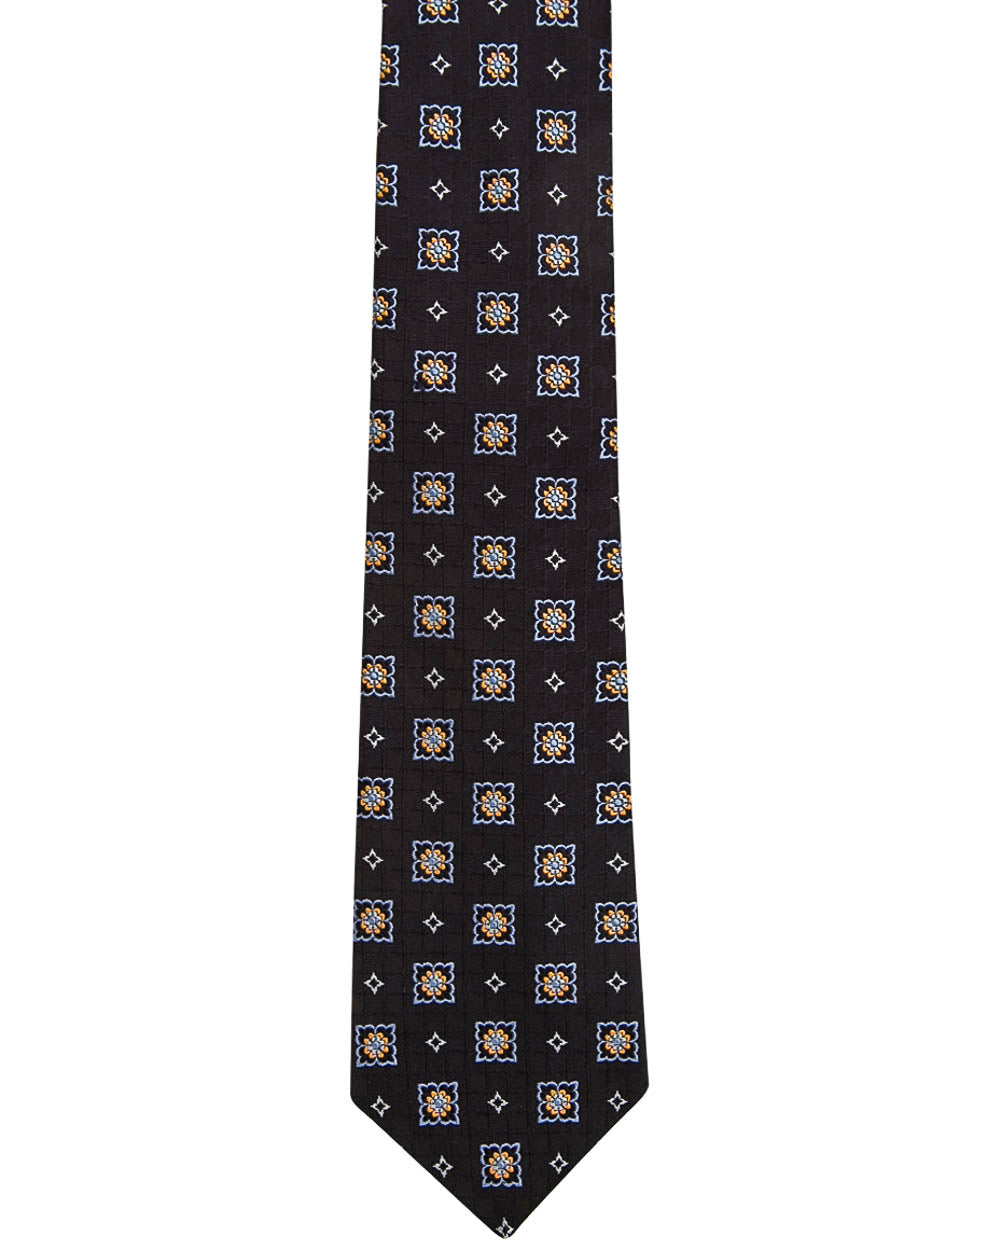 Navy with Light Blue and Orange Floral Tie